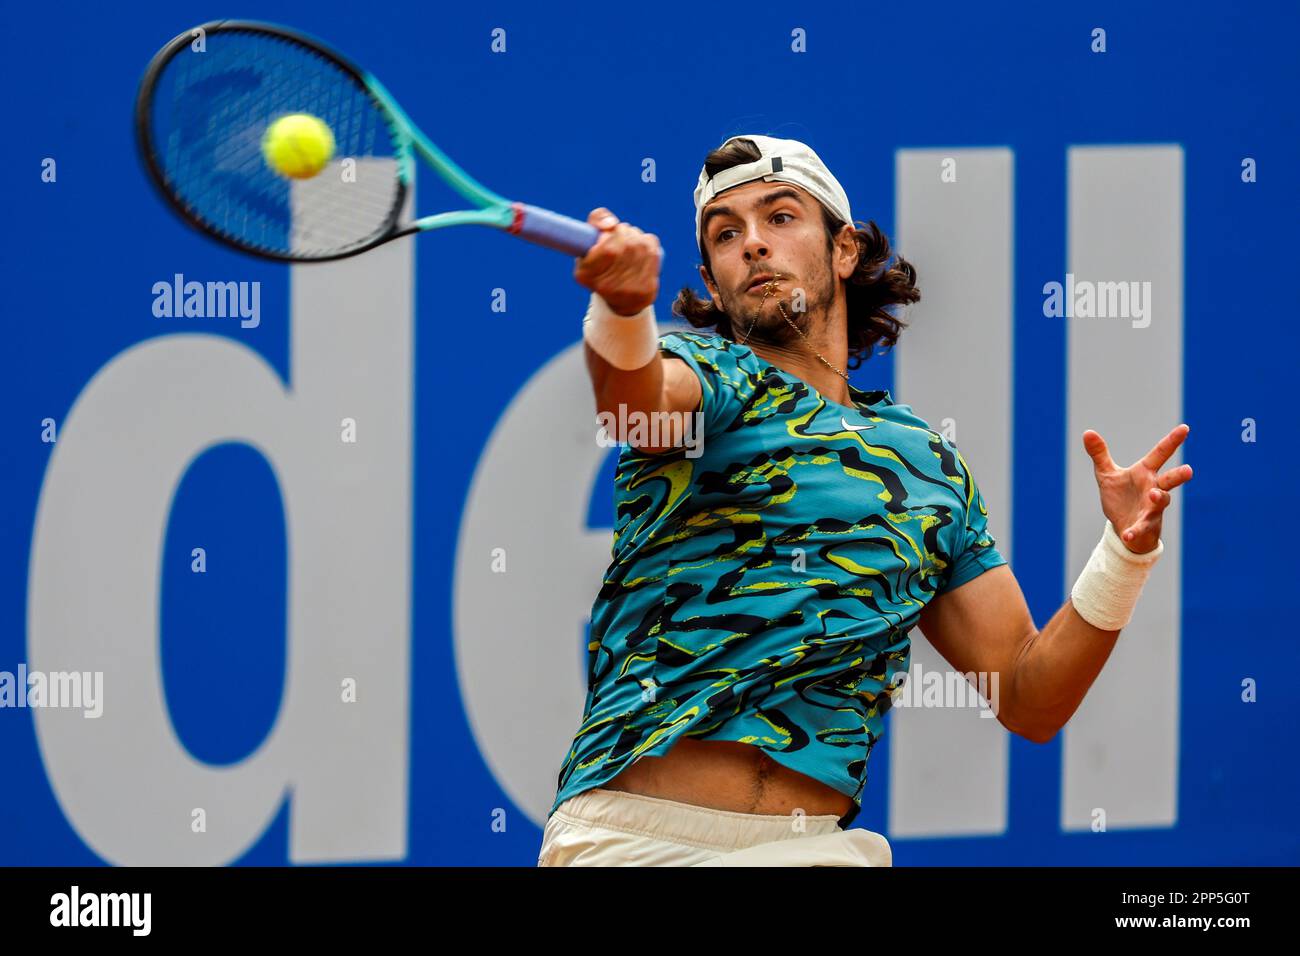 Lorenzo Musetti, of Italy, returns the ball to Stefanos Tsitsipas, of Greece, during a semi final open tennis tournament, in Barcelona, Spain, Saturday, April 22, 2023